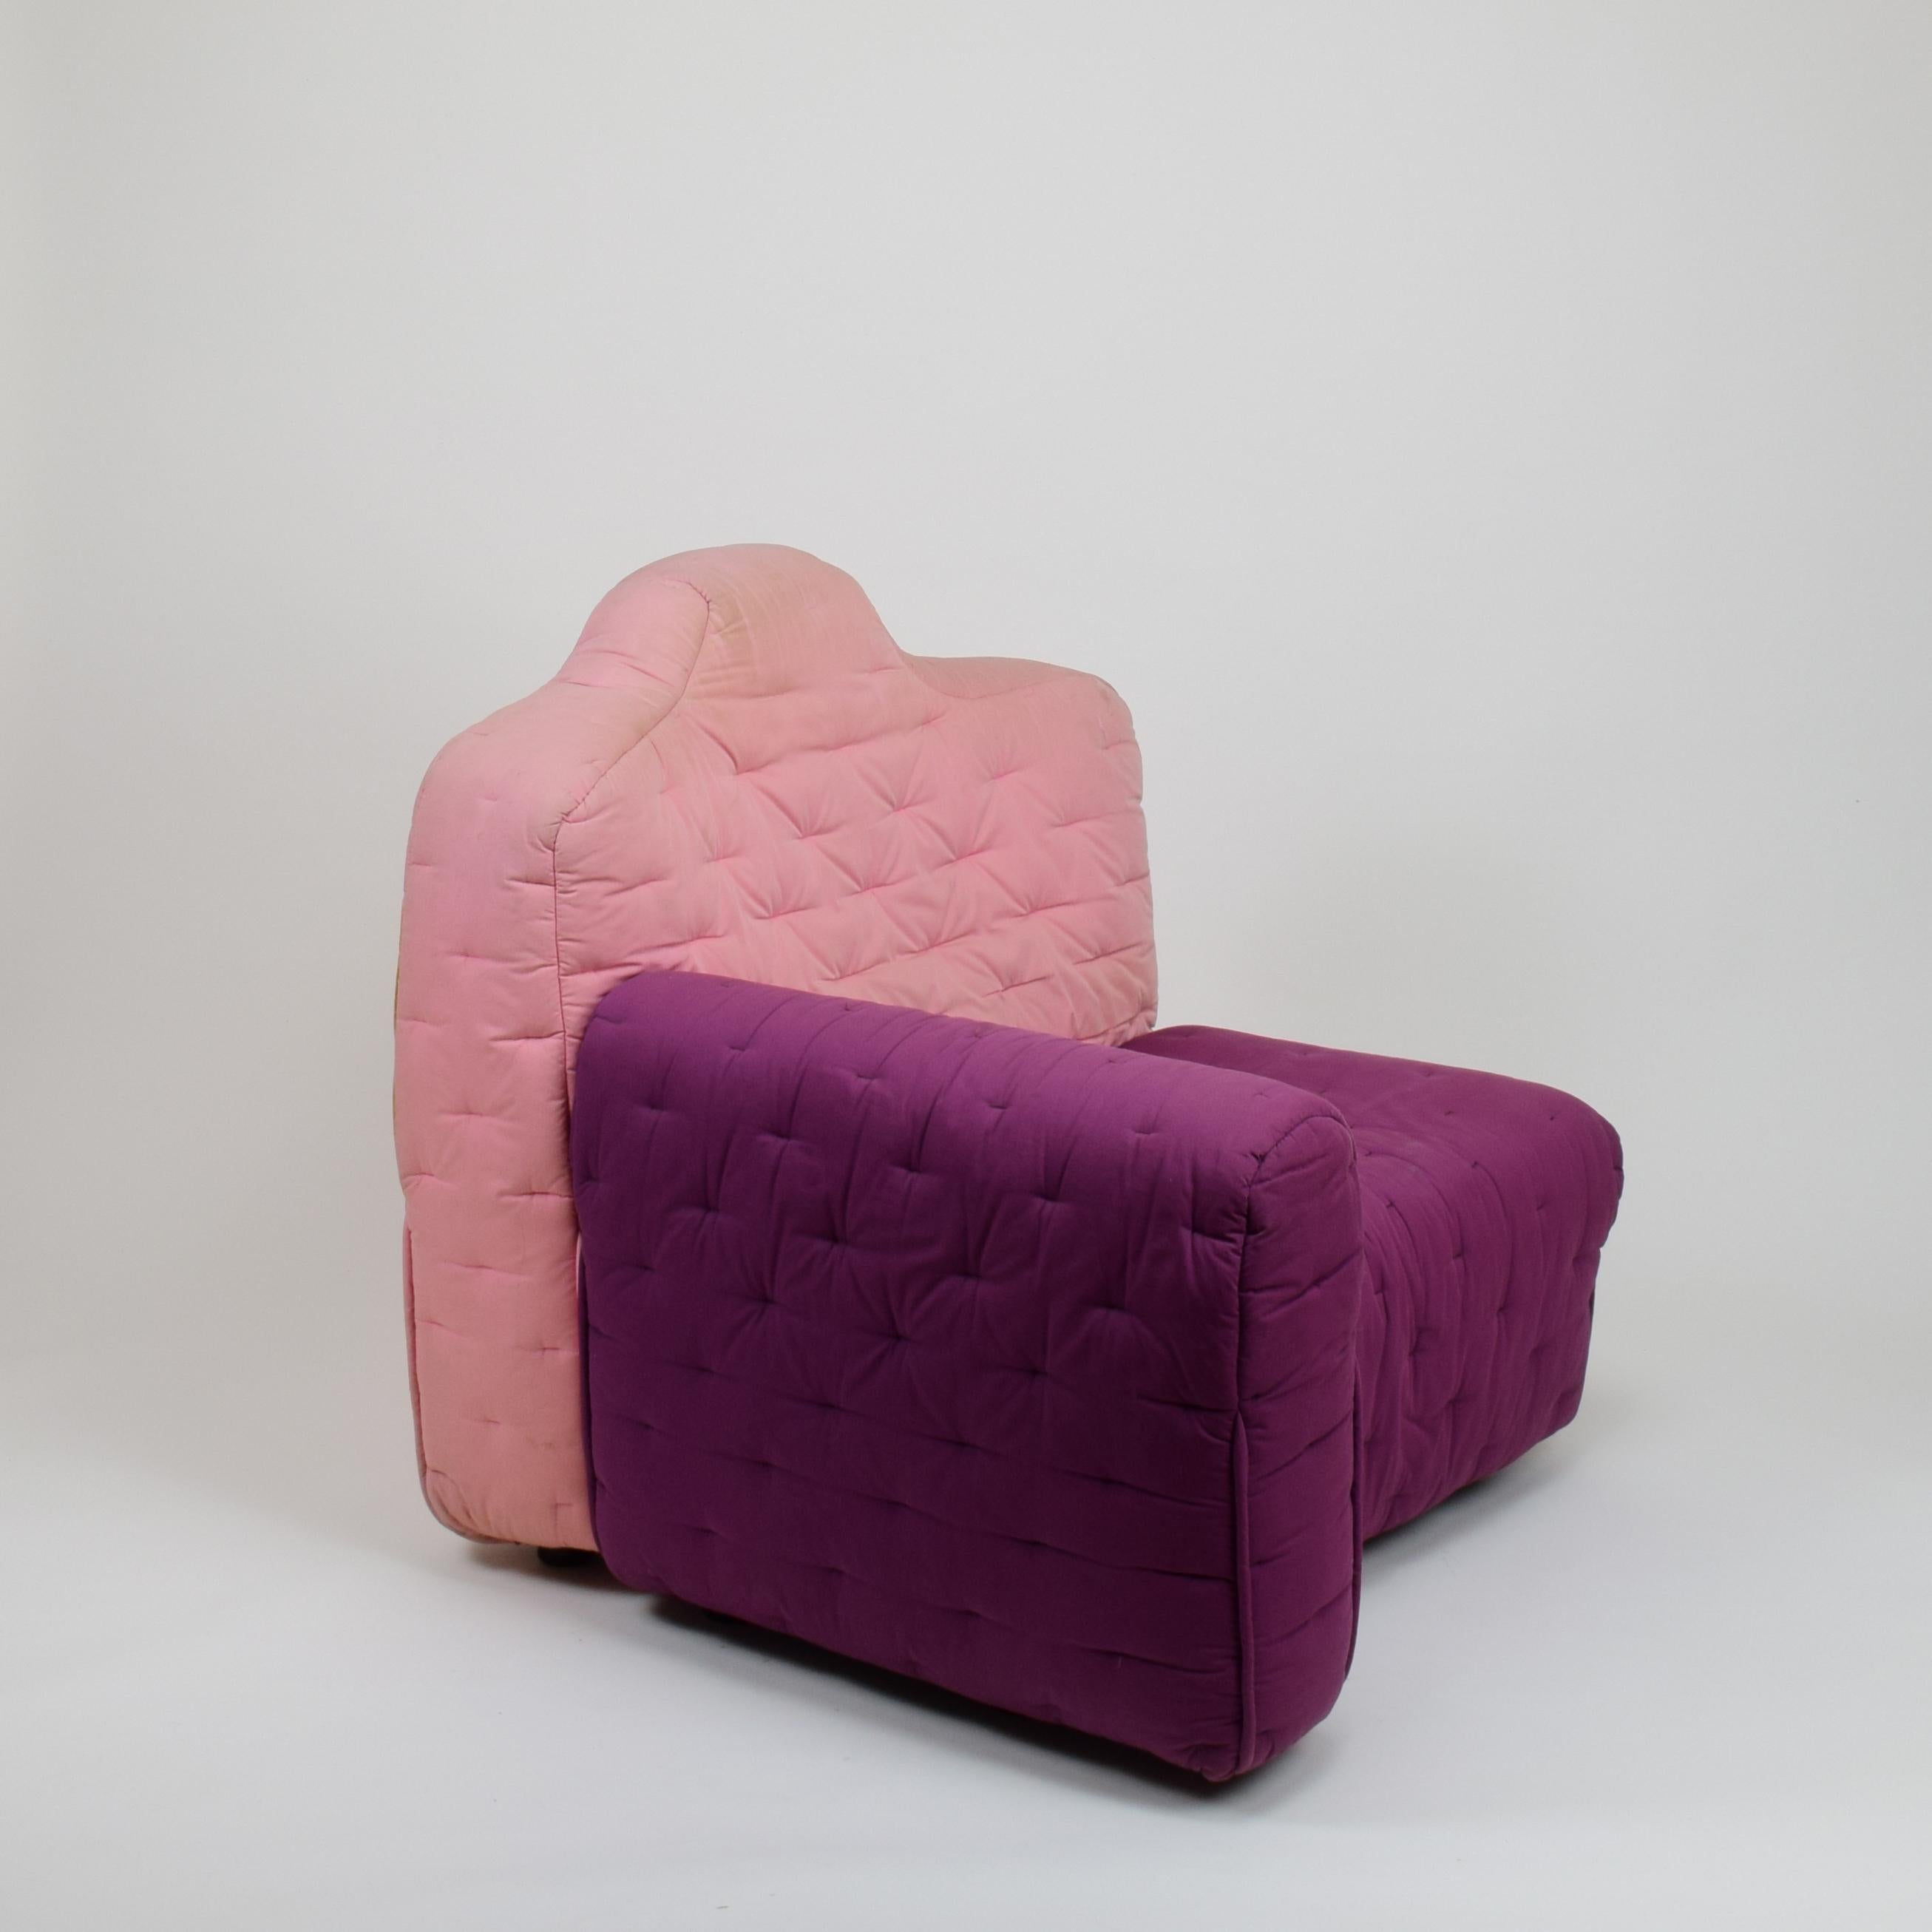 Late 20th Century Gaetano Pesce, 'Cannaregio' Armchair, Cassina Italy 1987, Large Pink and Purple For Sale